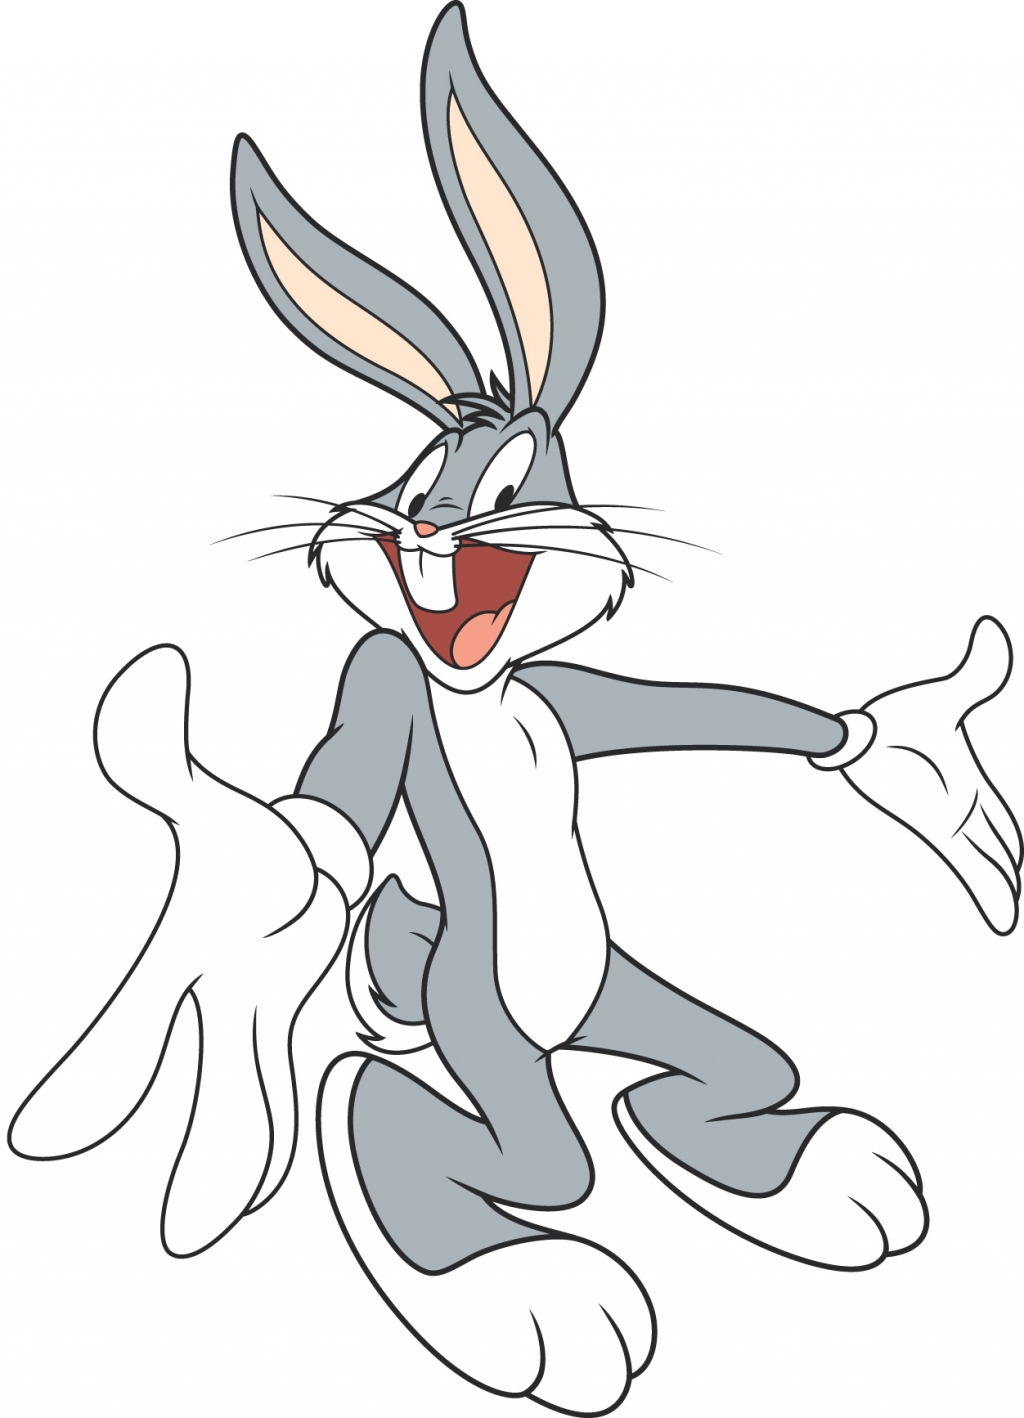 Hi bugs bunny picture bugs bunny cartoon pictures